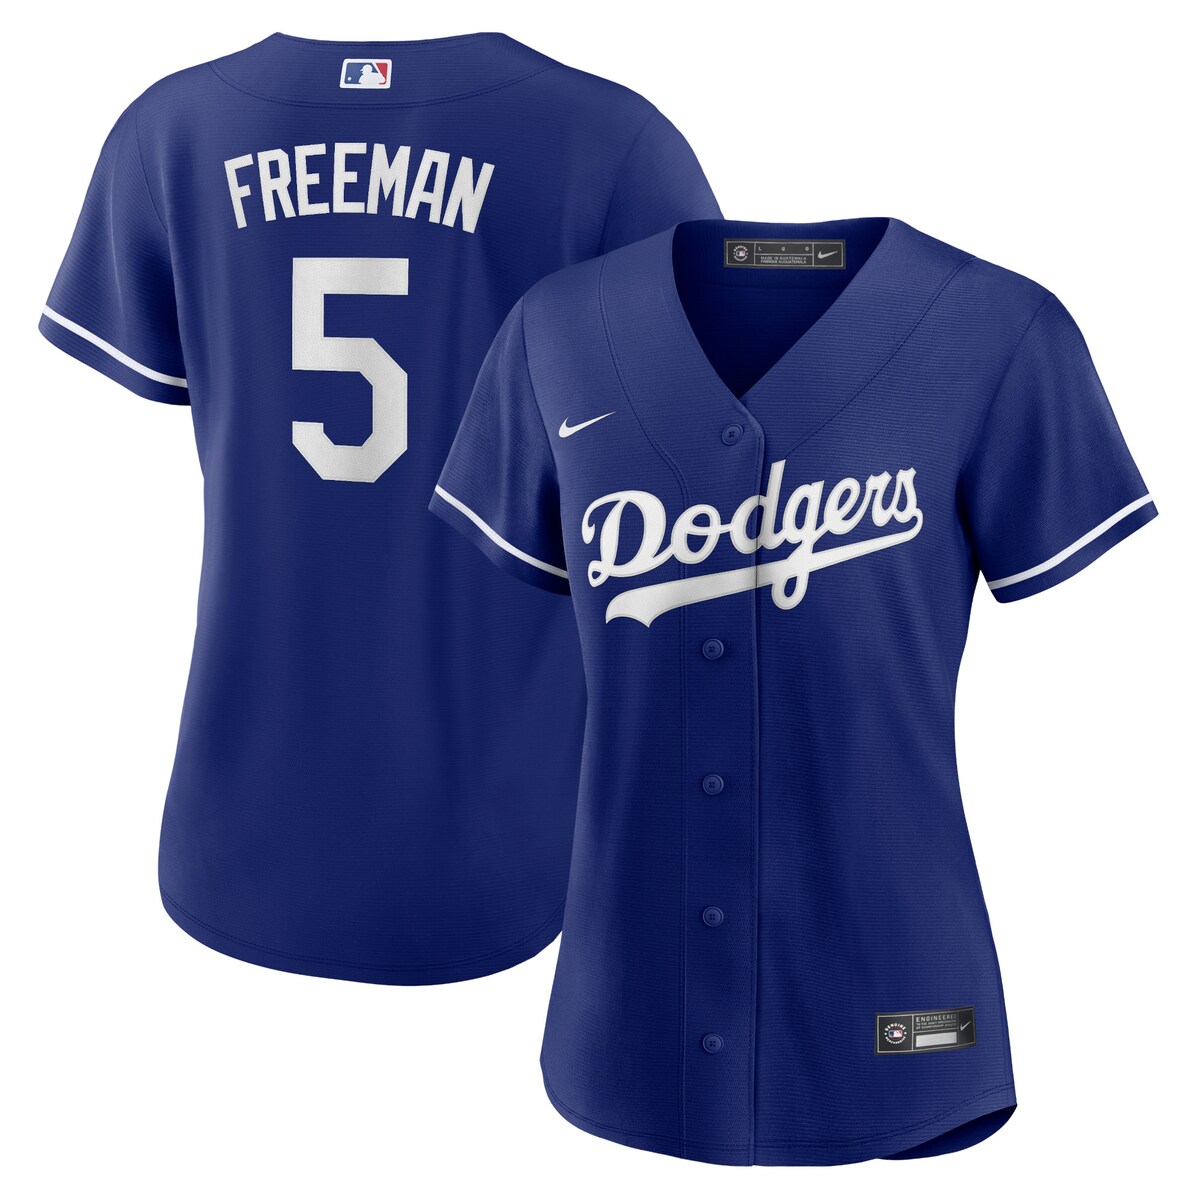 You're the type of Los Angeles Dodgers fan who counts down the minutes until the first pitch. When your squad finally hits the field, show your support all game long with this Freddie Freeman Replica Player jersey from Nike. Its classic full-button design features bold player and Los Angeles Dodgers applique graphics, leaving no doubt you'll be along for the ride for all 162 games and beyond this season.Heat-sealed transfer appliqueReplica JerseyOfficially licensedJersey Color Style: AlternateMaterial: 100% PolyesterMLB Batterman applique on center back neckMachine wash, tumble dry lowFull-button frontBrand: NikeShort sleeveHeat-sealed jock tagRounded hem